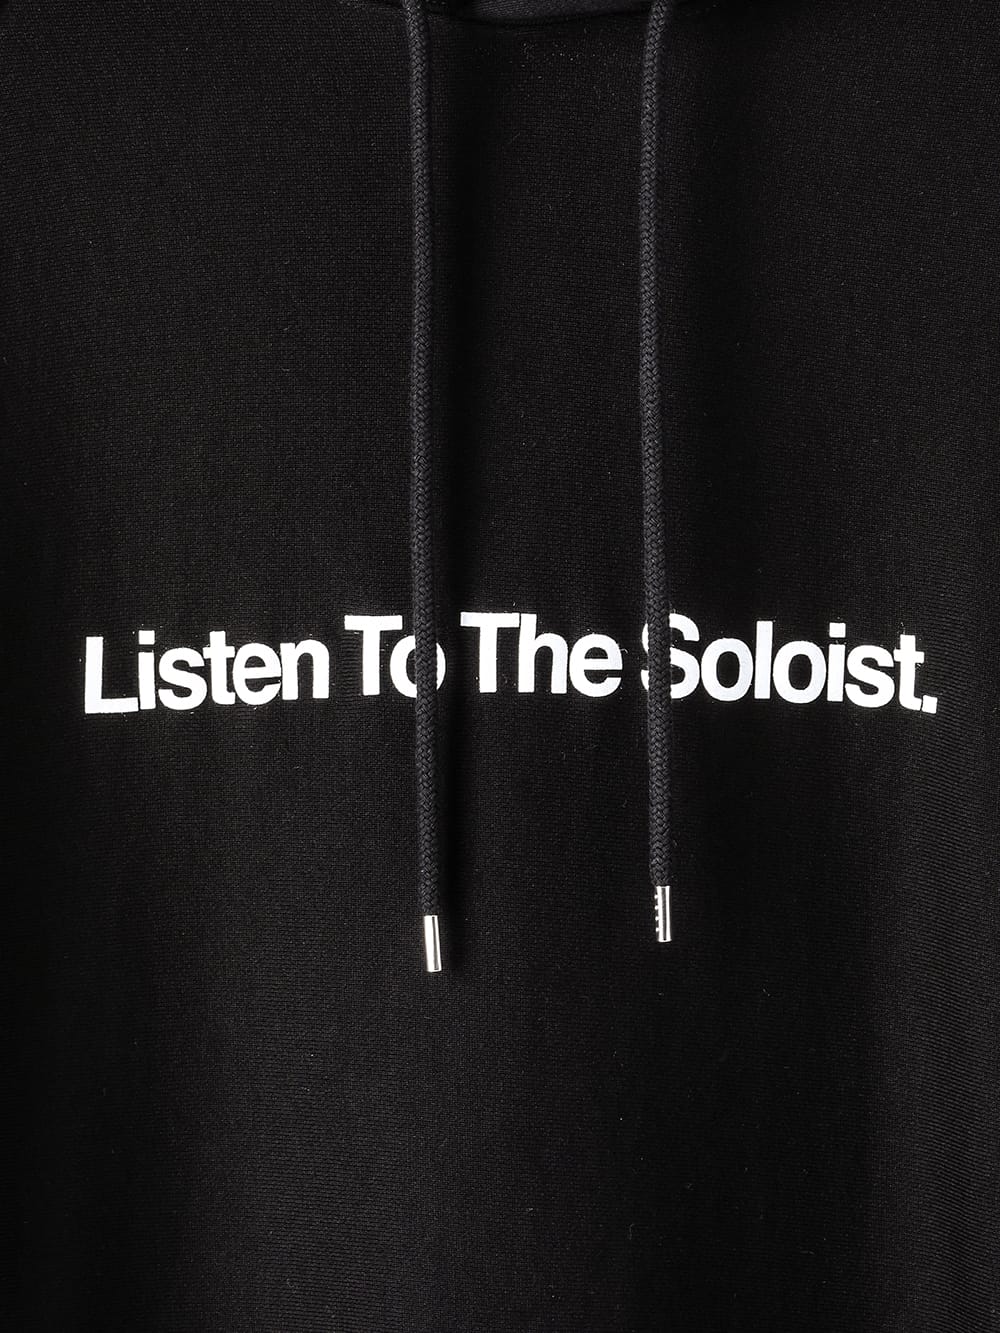 sxc.0002-black×red Listen To The Soloist.(oversized bicolor hoodie ...